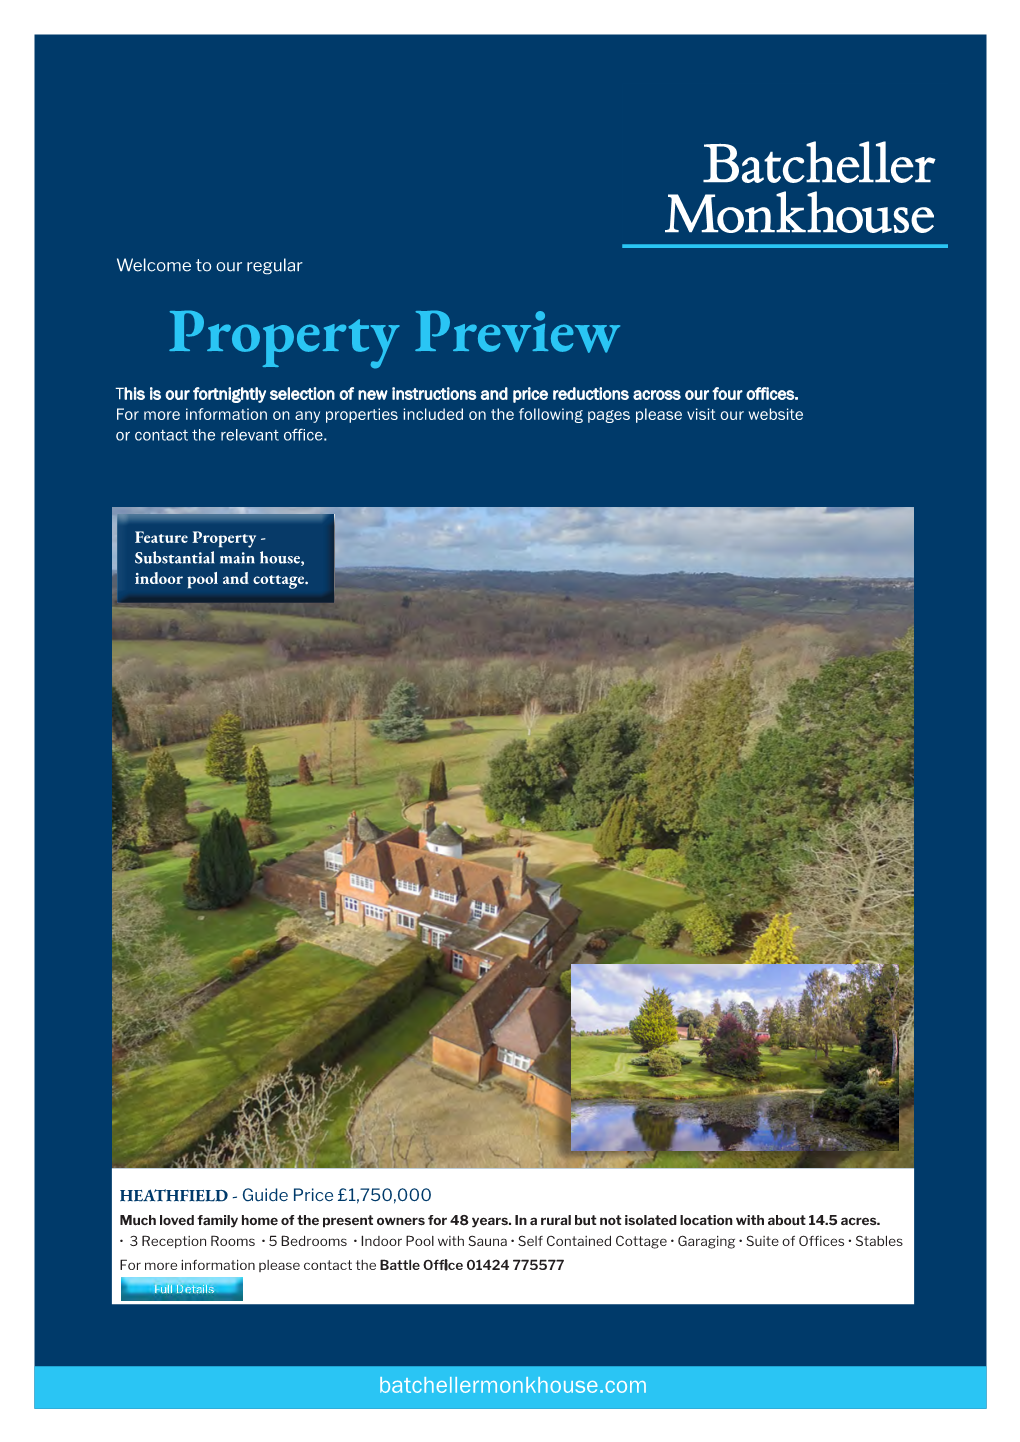 Property Preview This Is Our Fortnightly Selection of New Instructions and Price Reductions Across Our Four Offices